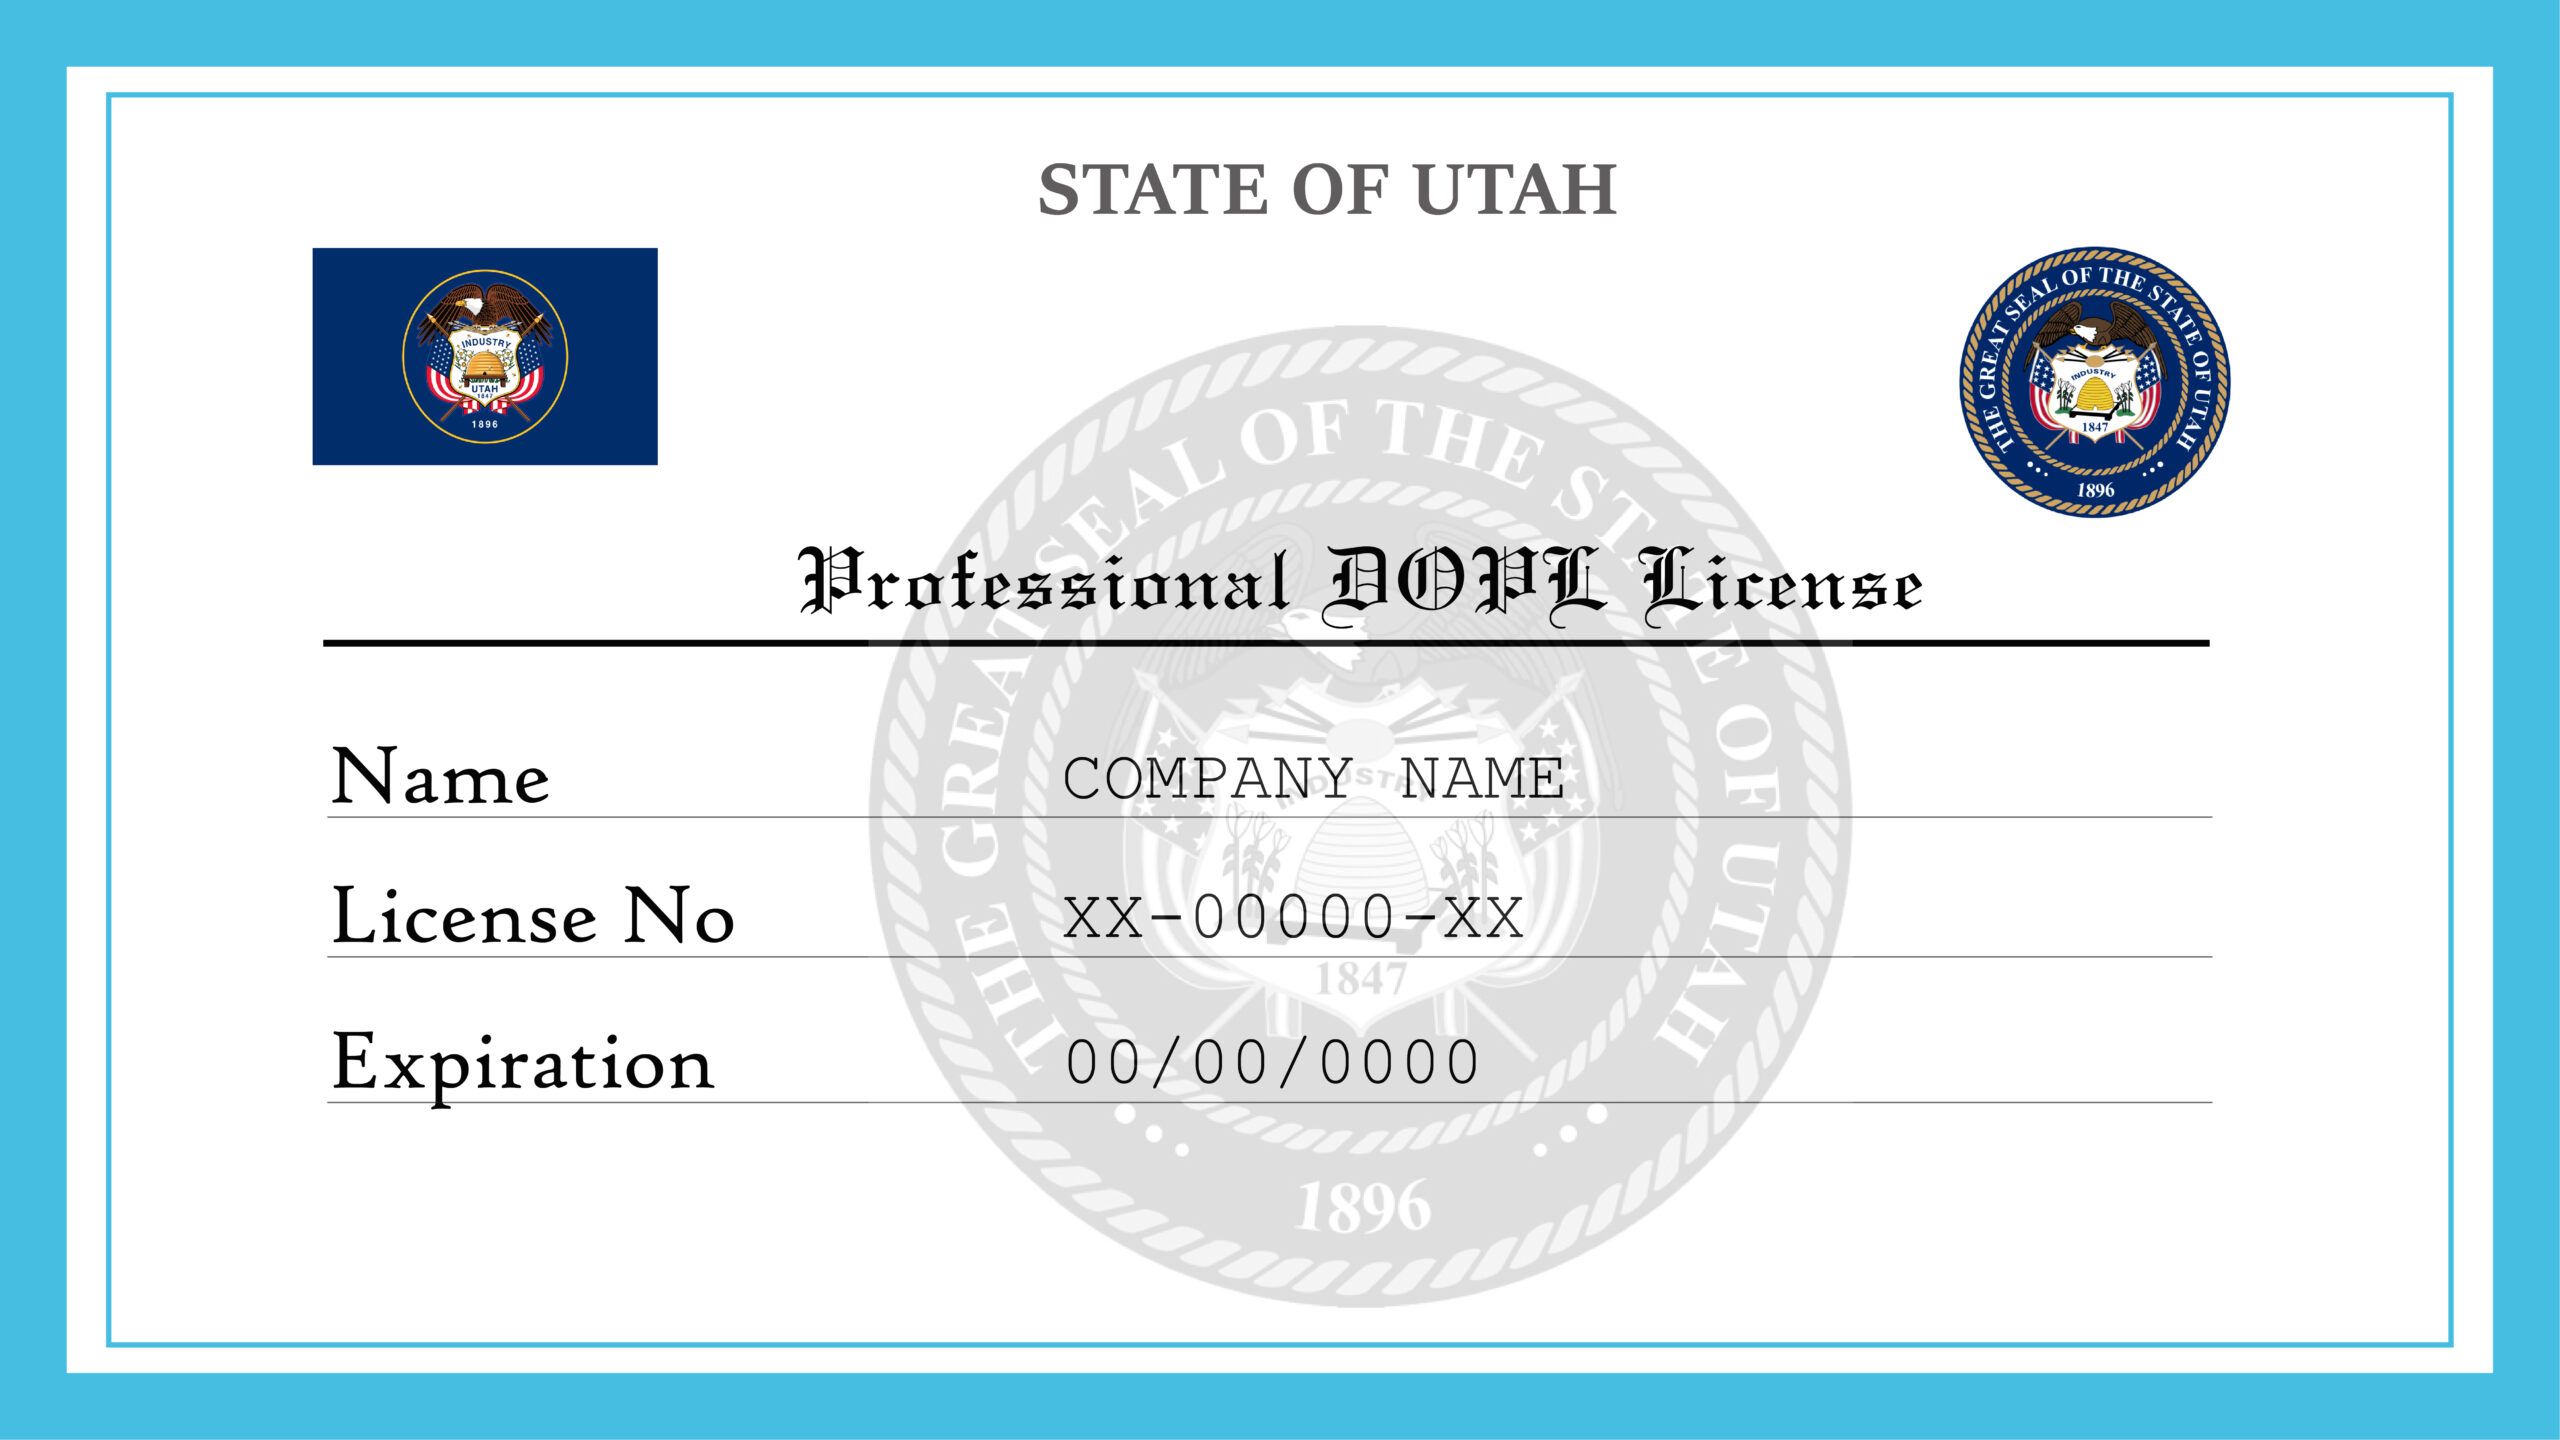 Colorado Division of Professions and Occupations - Renew a License - wide 1